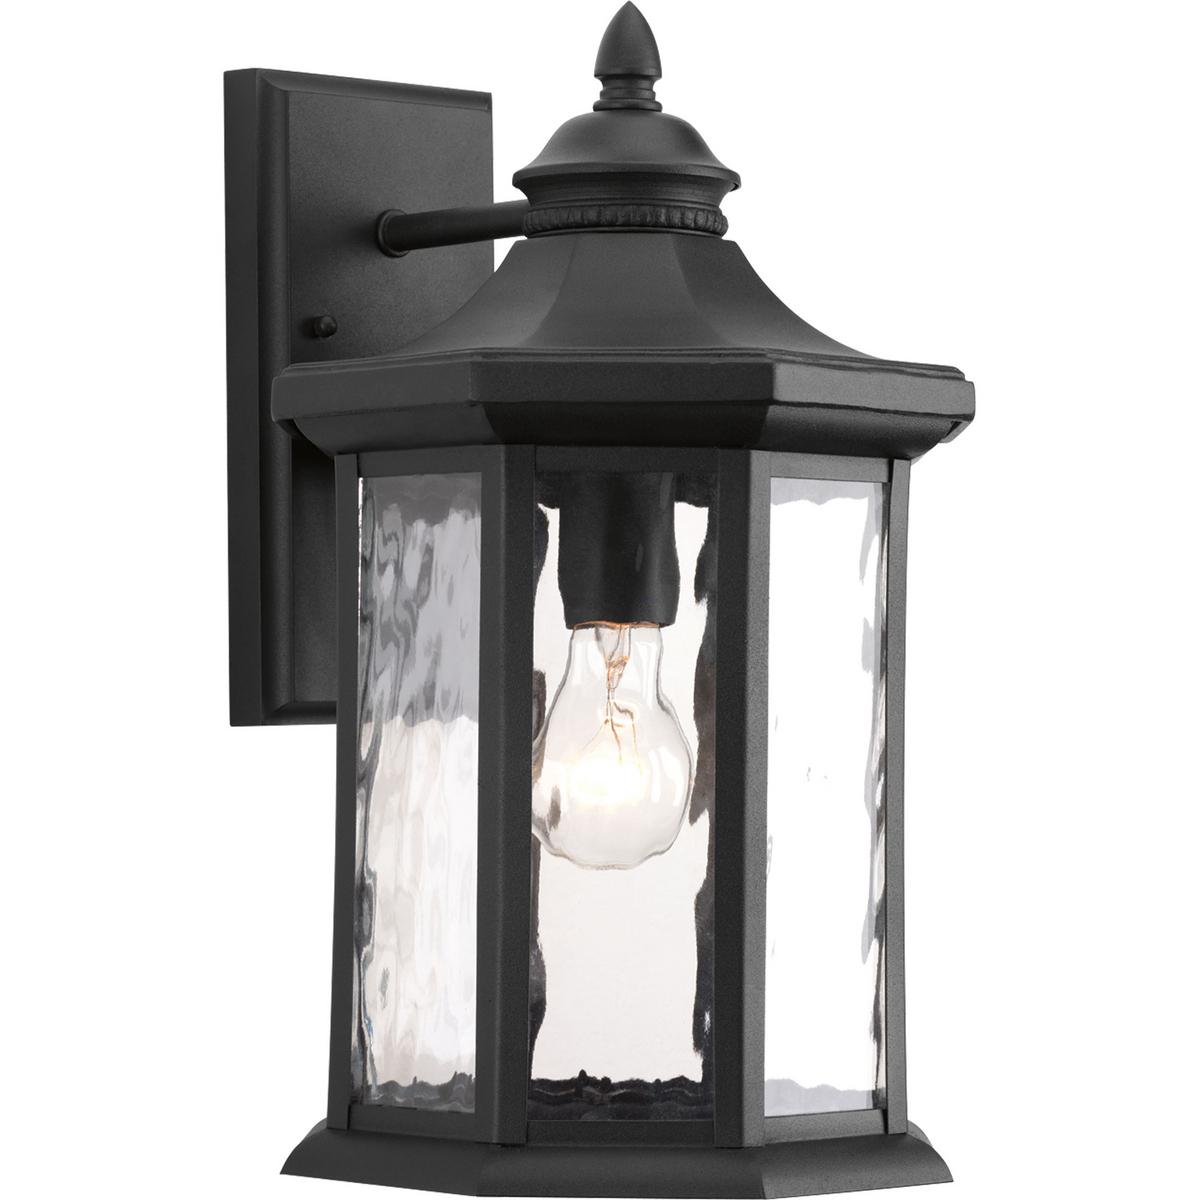 Hubbell P6072-31 One-light wall lantern with a distinct octagonal shape for classic styling, highlighted by clear water glass elements.  ; Black finish. ; Distinct octagonal shape. ; Classic styling. ; Clear water glass elements.